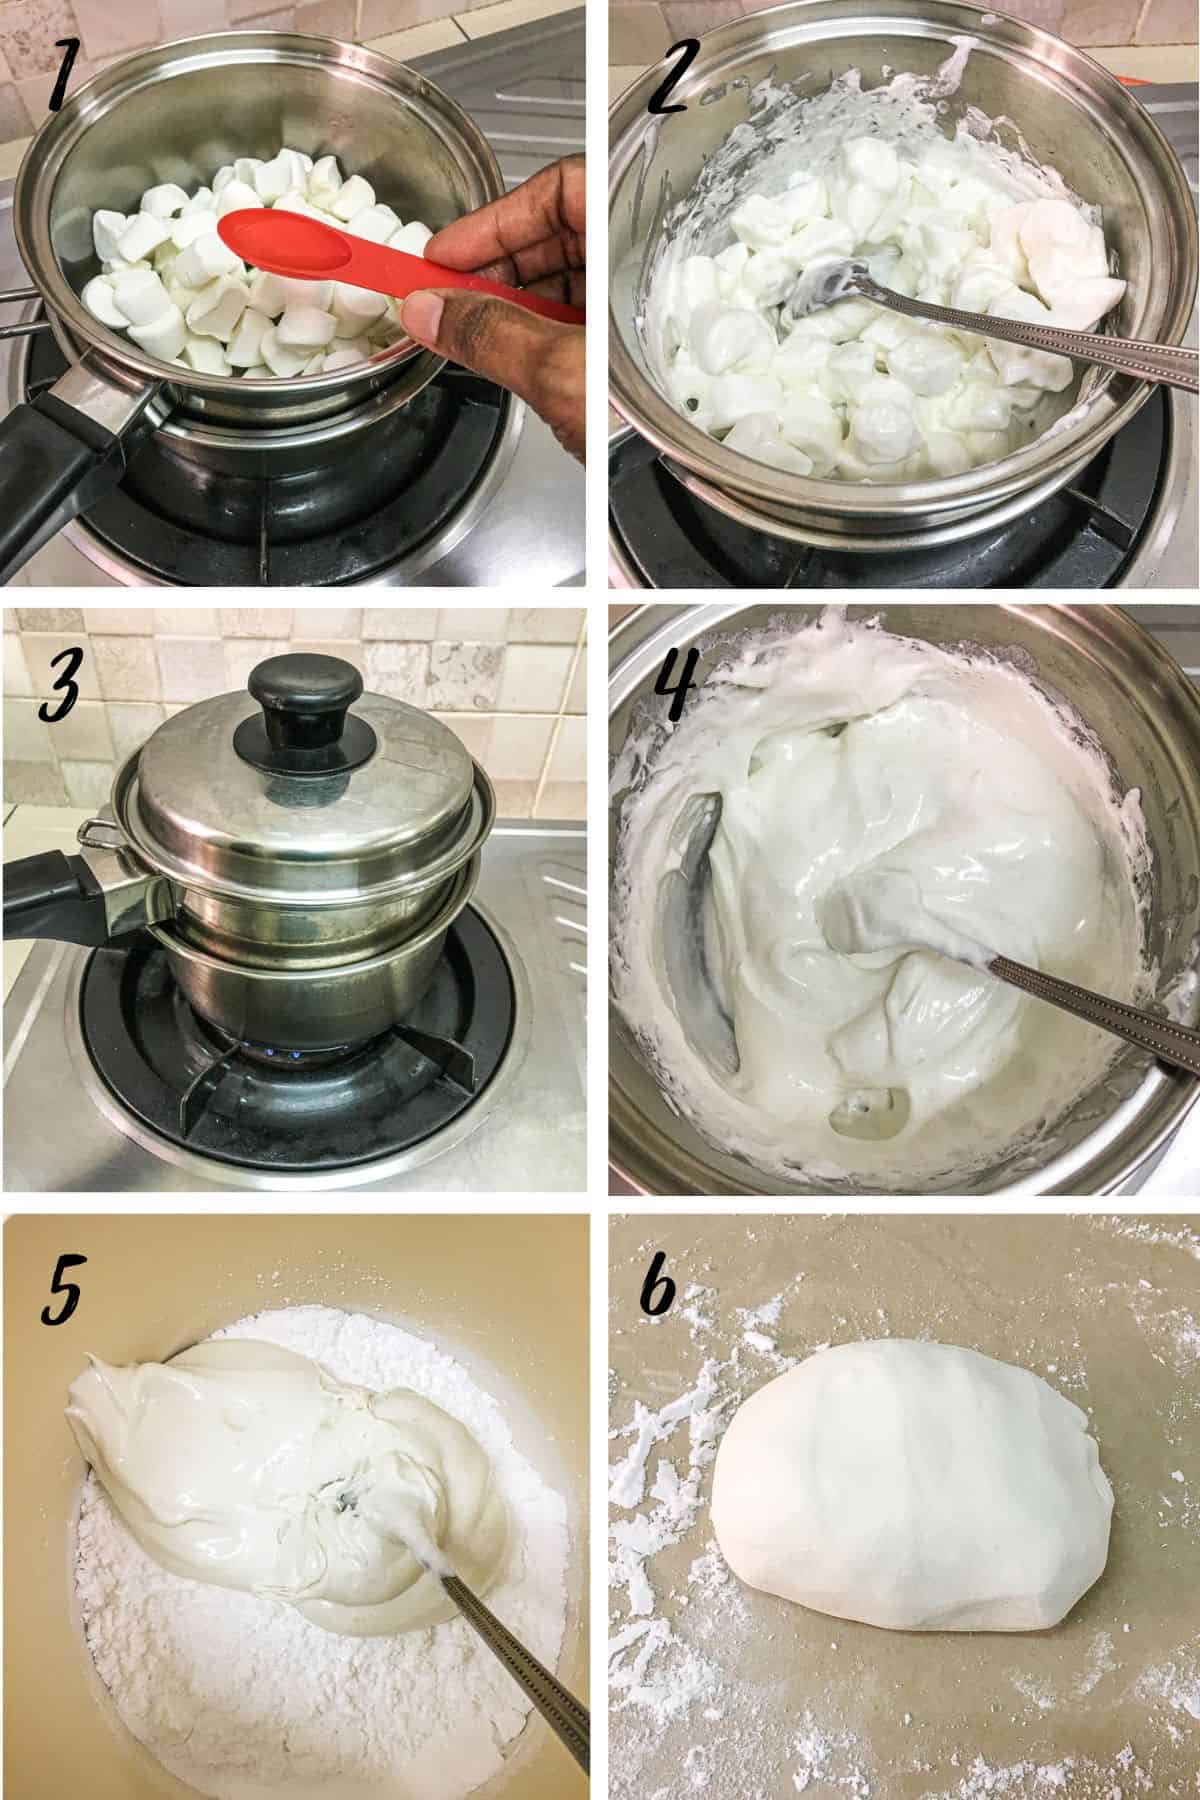 A poster of 6 images showing how to melt marshmallows over double boiler.